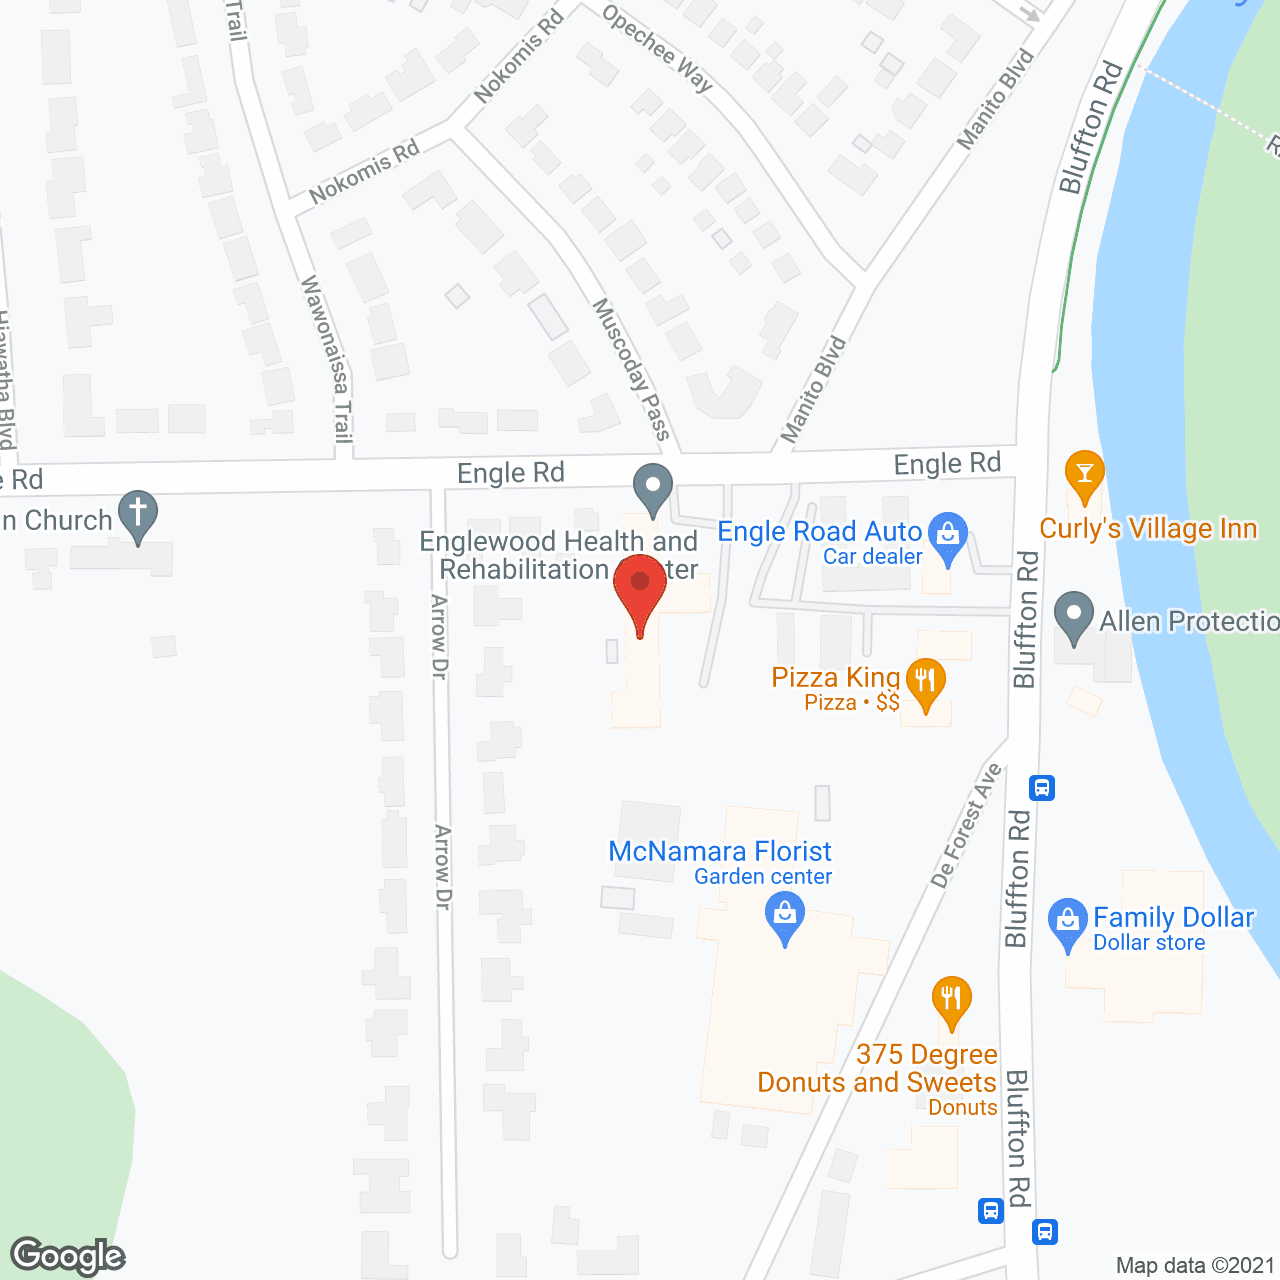 Englewood Health and Rehab Ctr in google map